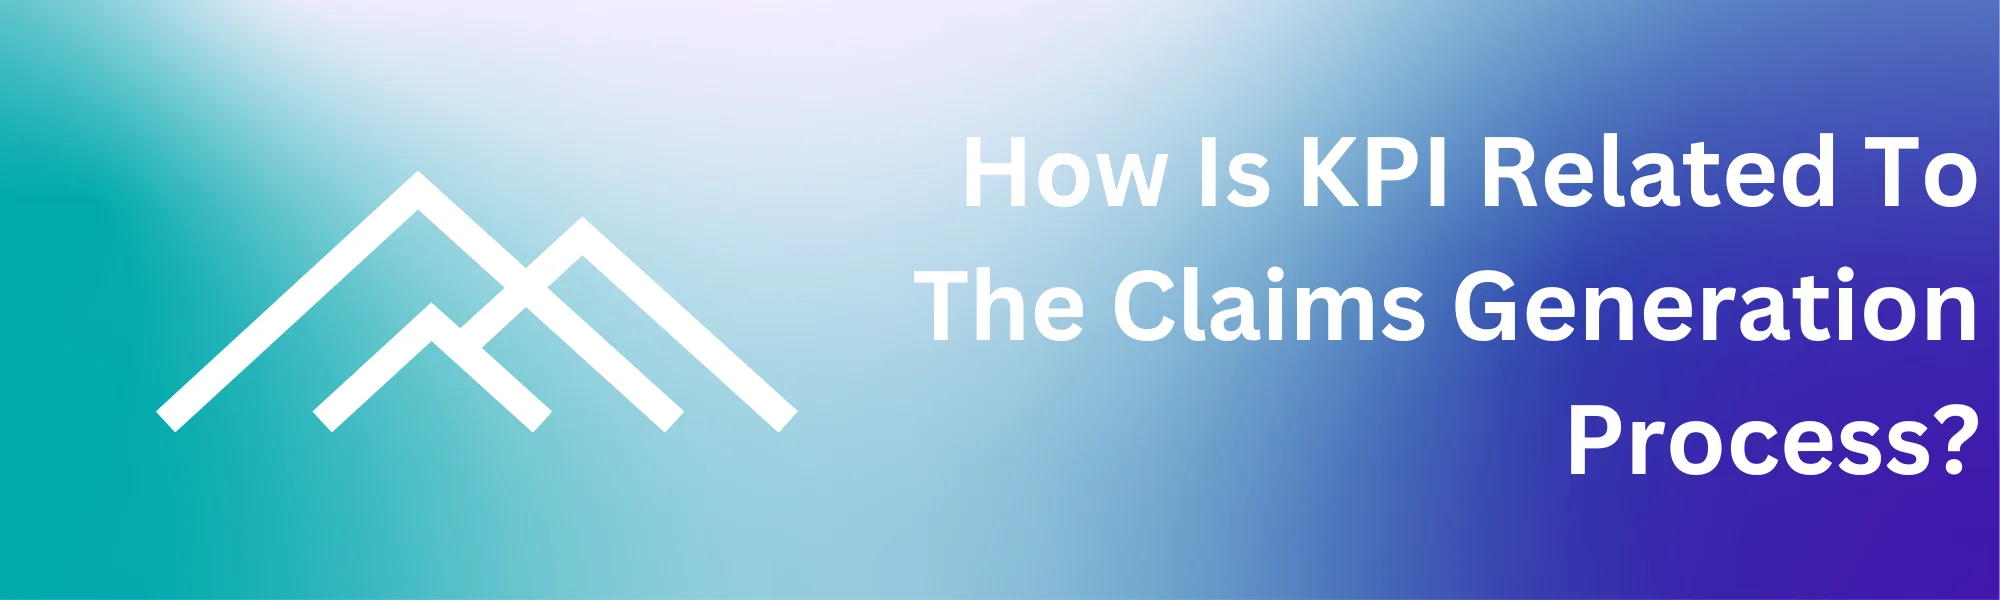 How Is KPI Related To The Claims Generation Process?